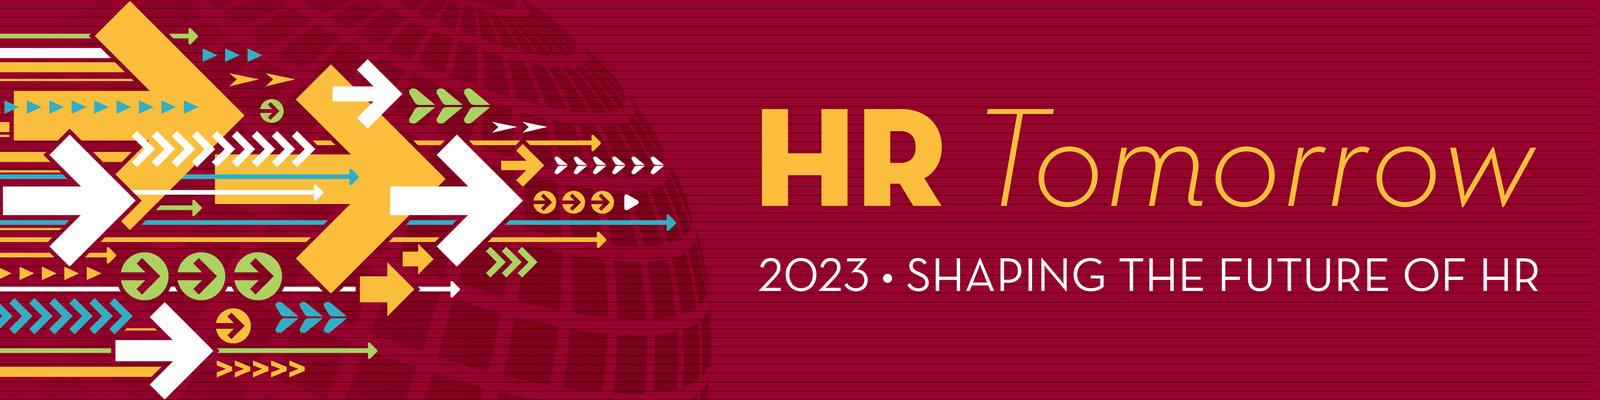 HR tomorrow banner 2023 - Shaping the future of HR